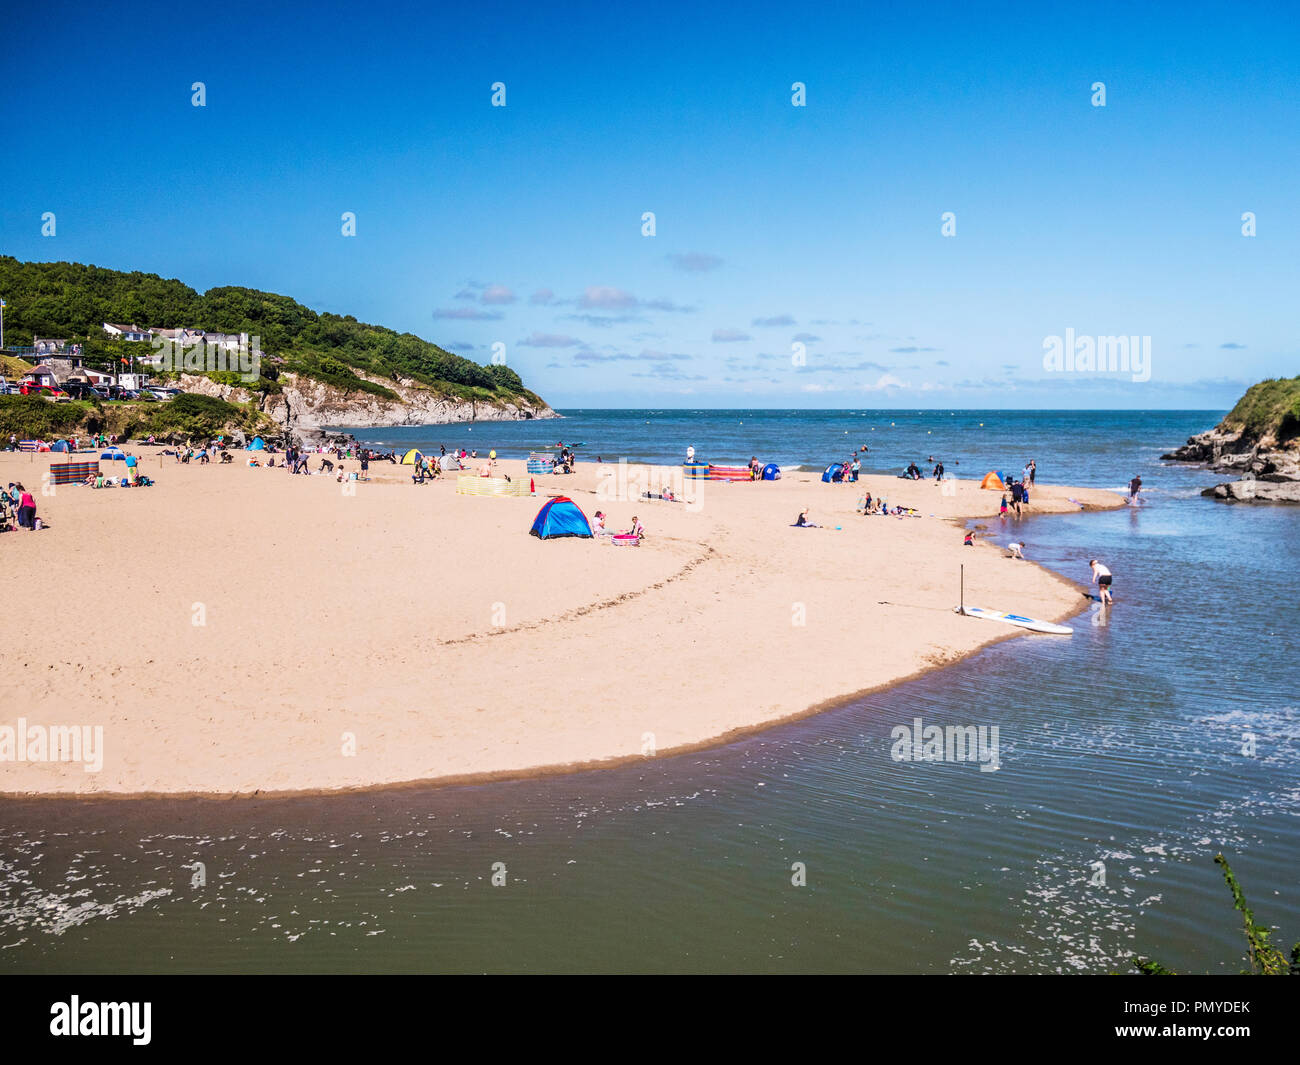 The beach at Aberporth on the Welsh coast in Ceredigion. Stock Photo